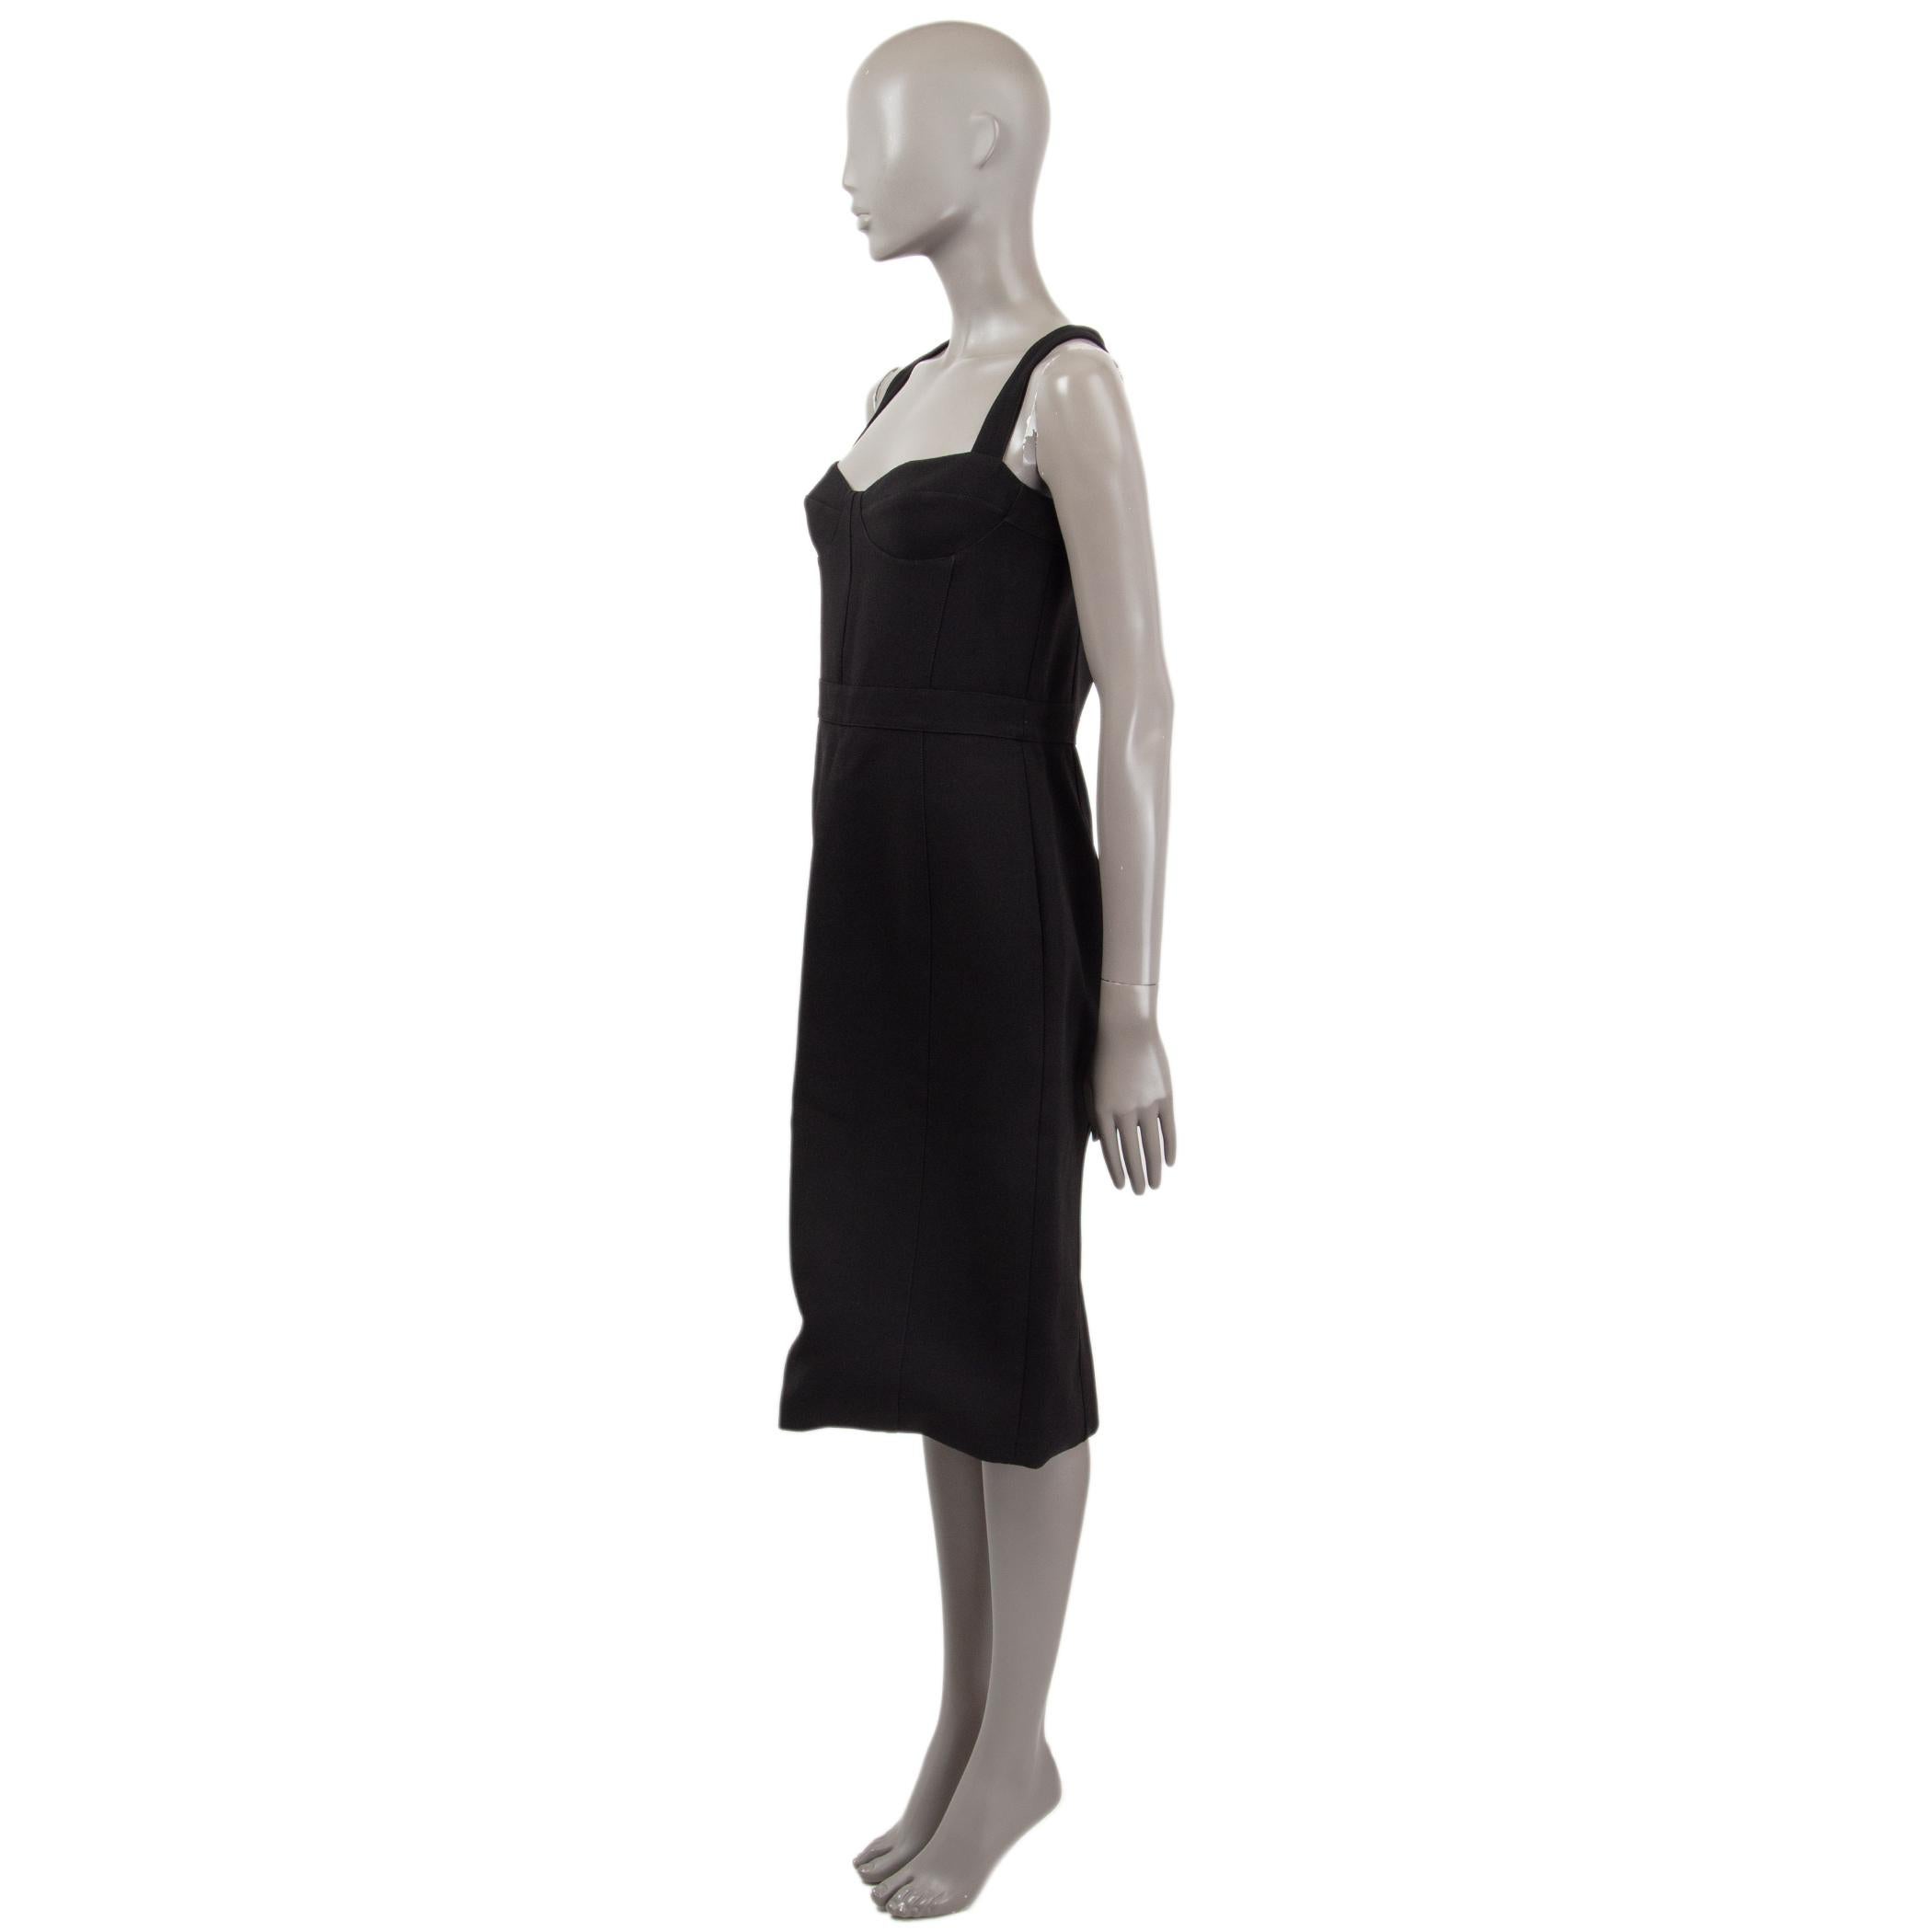 100% authentic Burberry Prorsum sleeveless bustier dress in black viscose (assumed cause tag is missing). Features a slit on the back. Opens with a zipper on the back. Lined in black viscose (100%). Has been worn and is in excellent